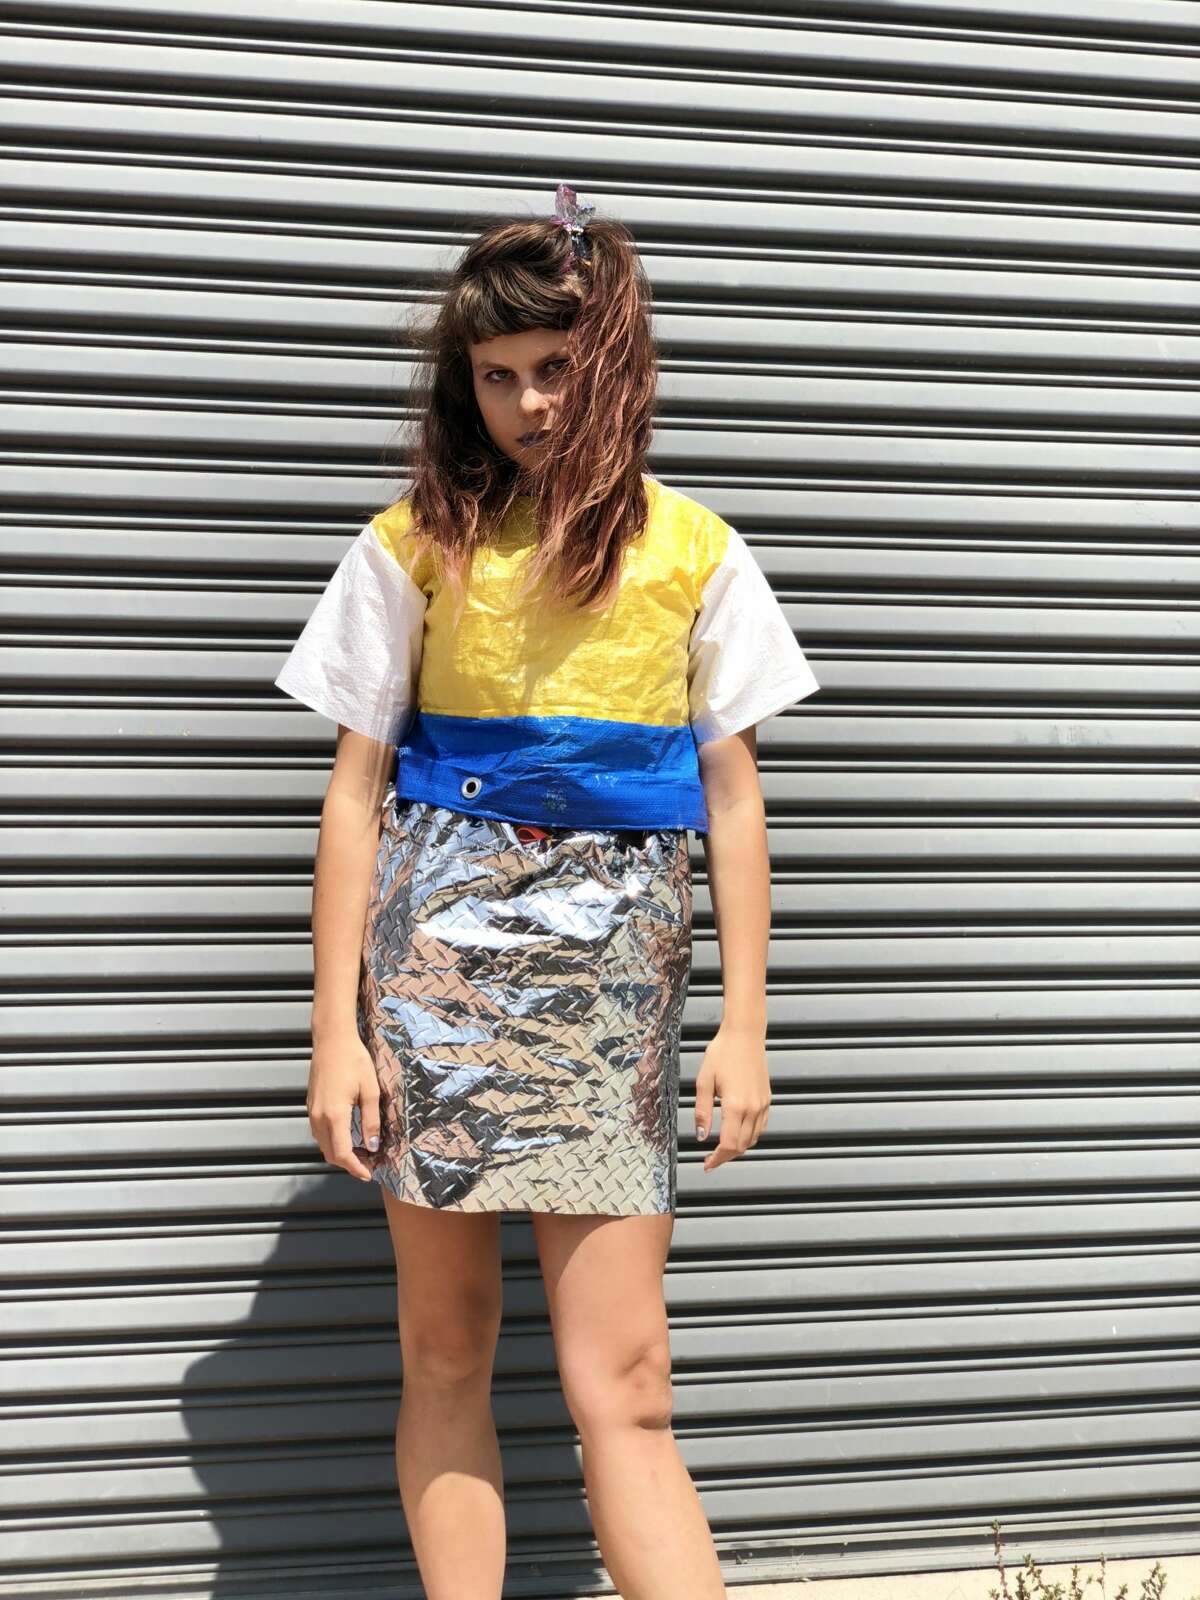 An artist trio created 36 outfits made entirely from materials found at ...